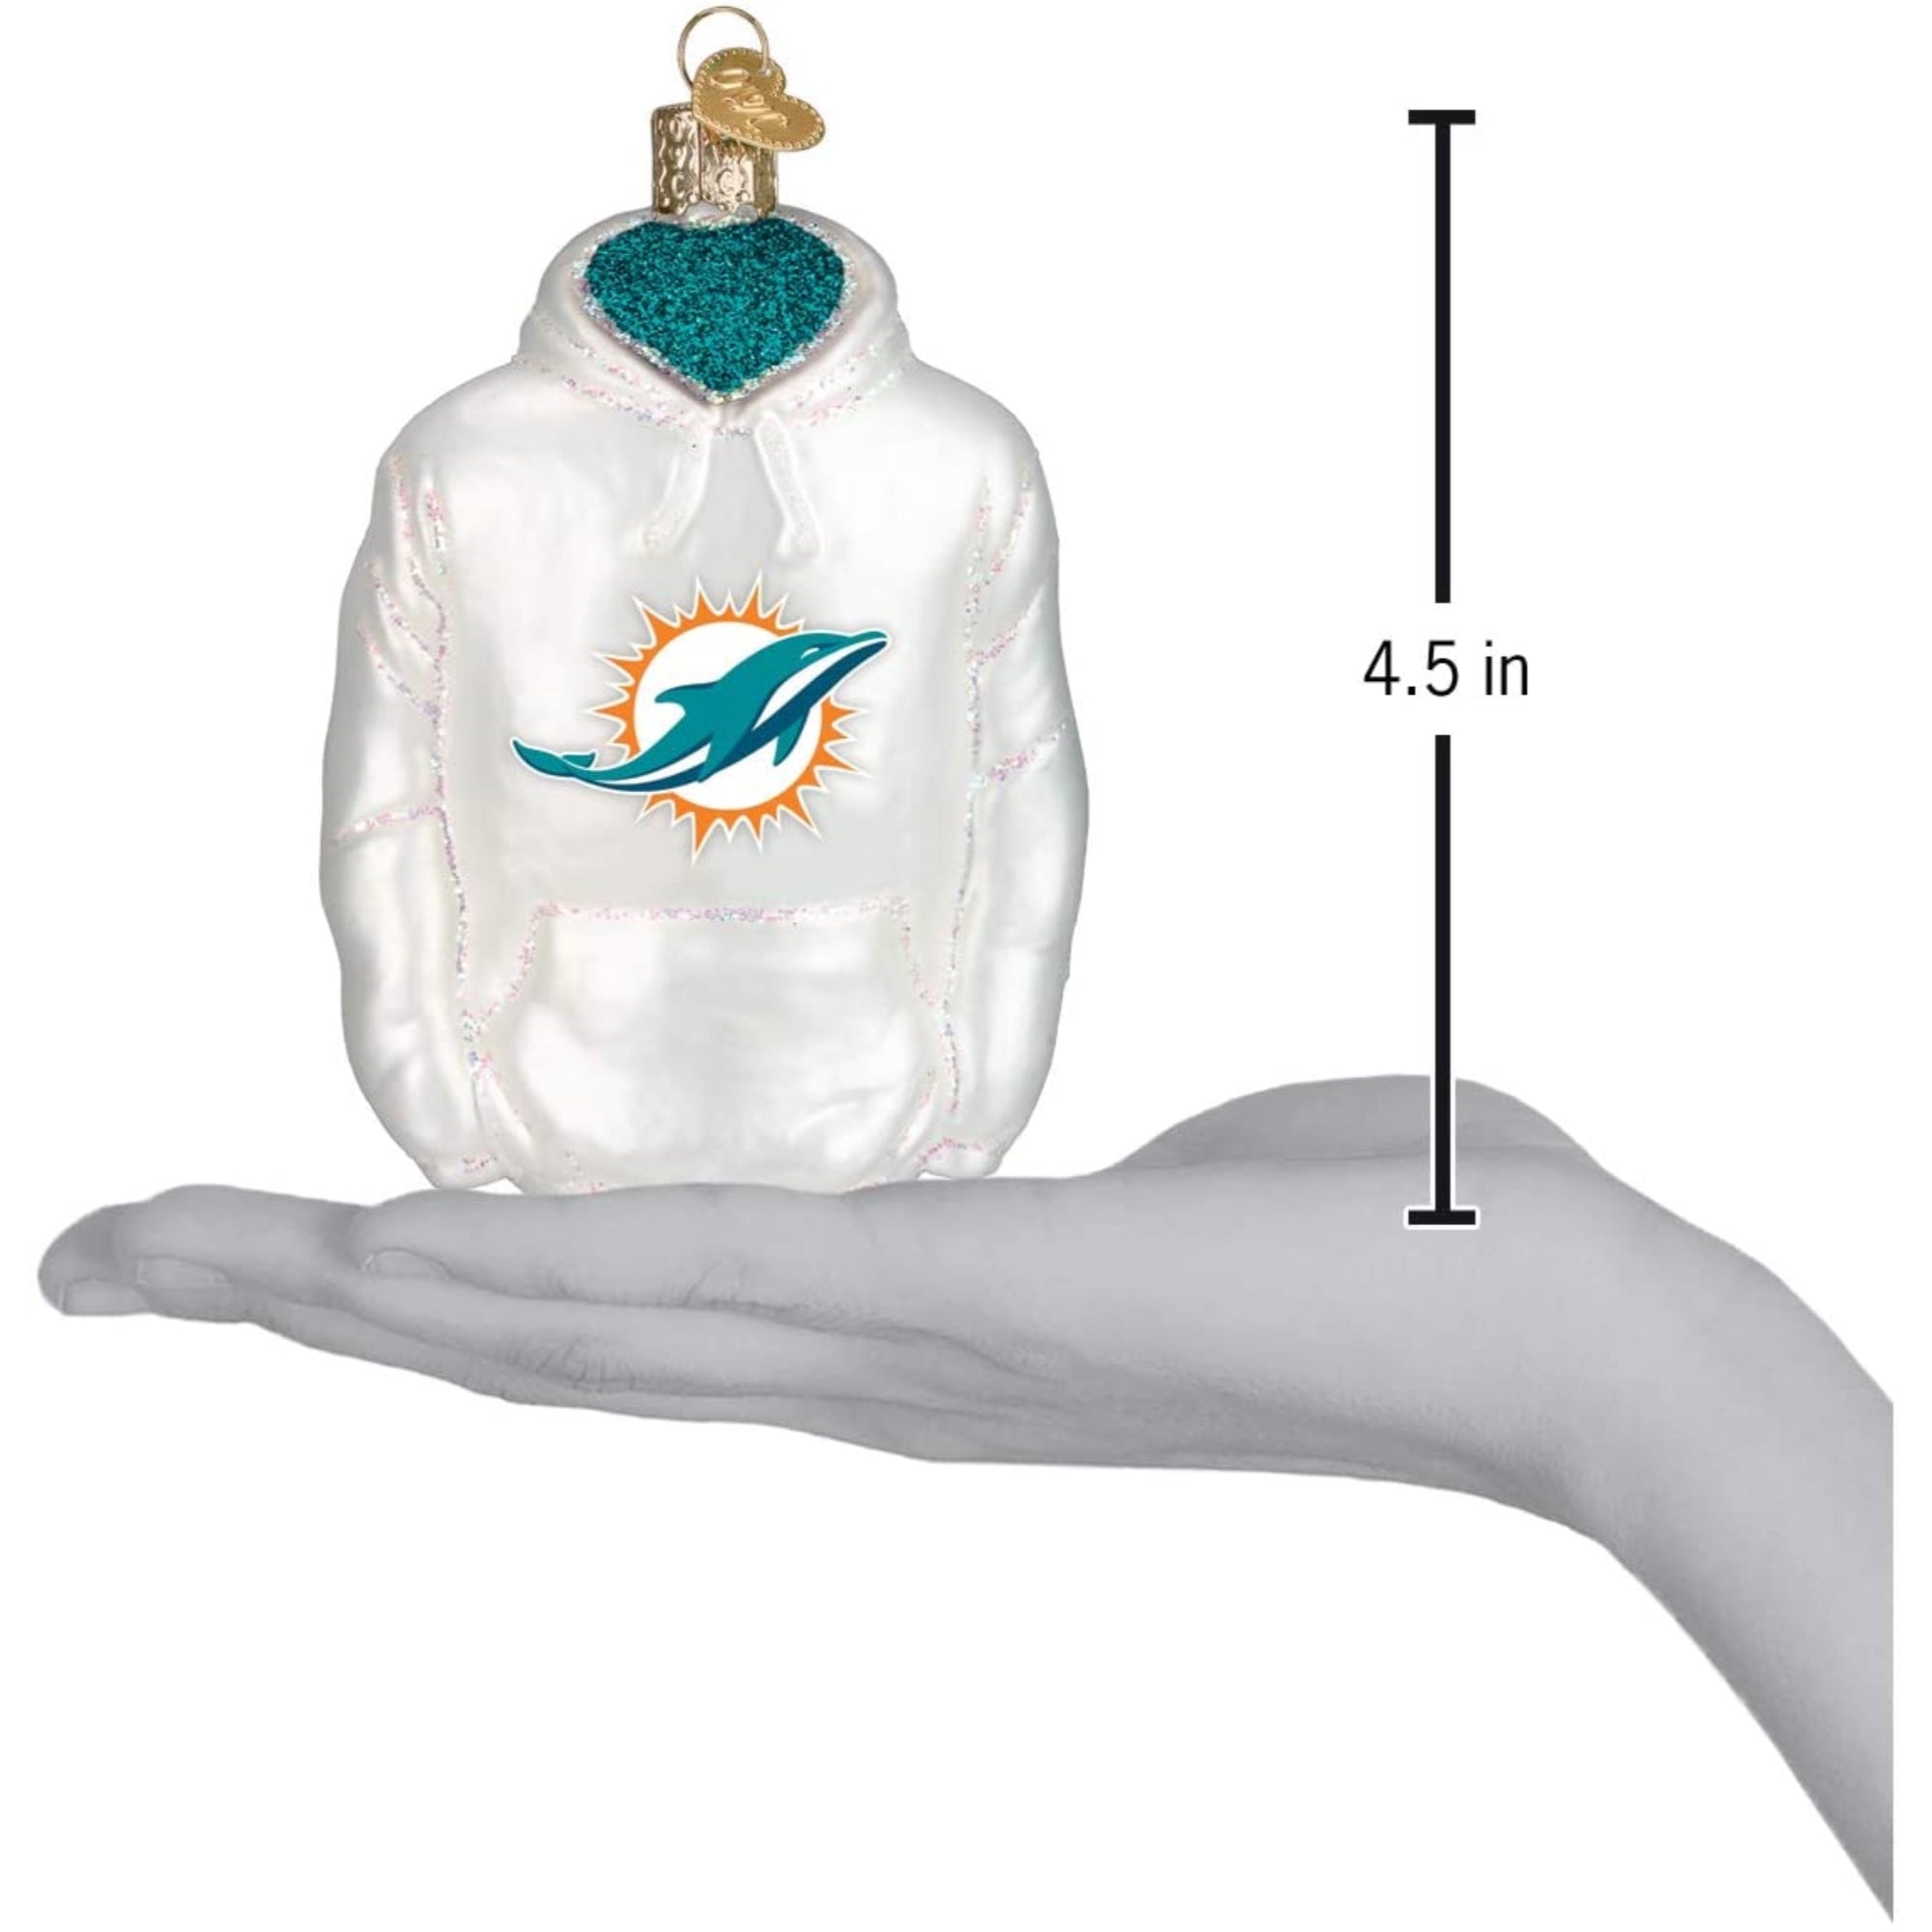 Old World Christmas Miami Dolphins Hoodie Ornament For Christmas Tree